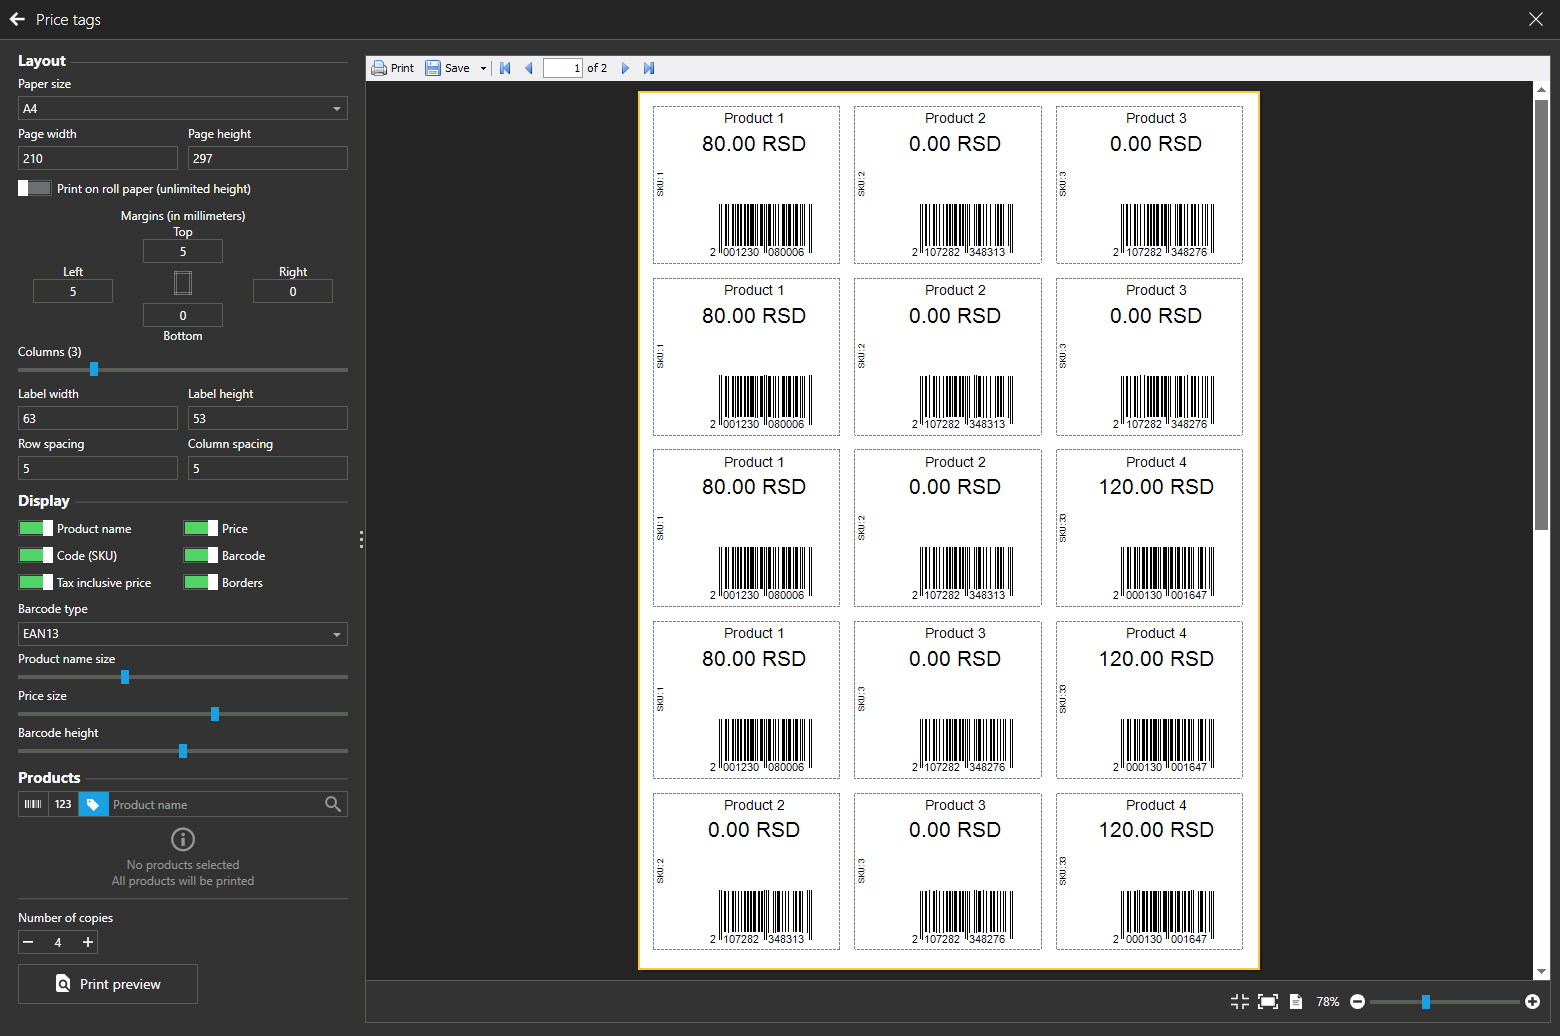 price-tags-layout.png